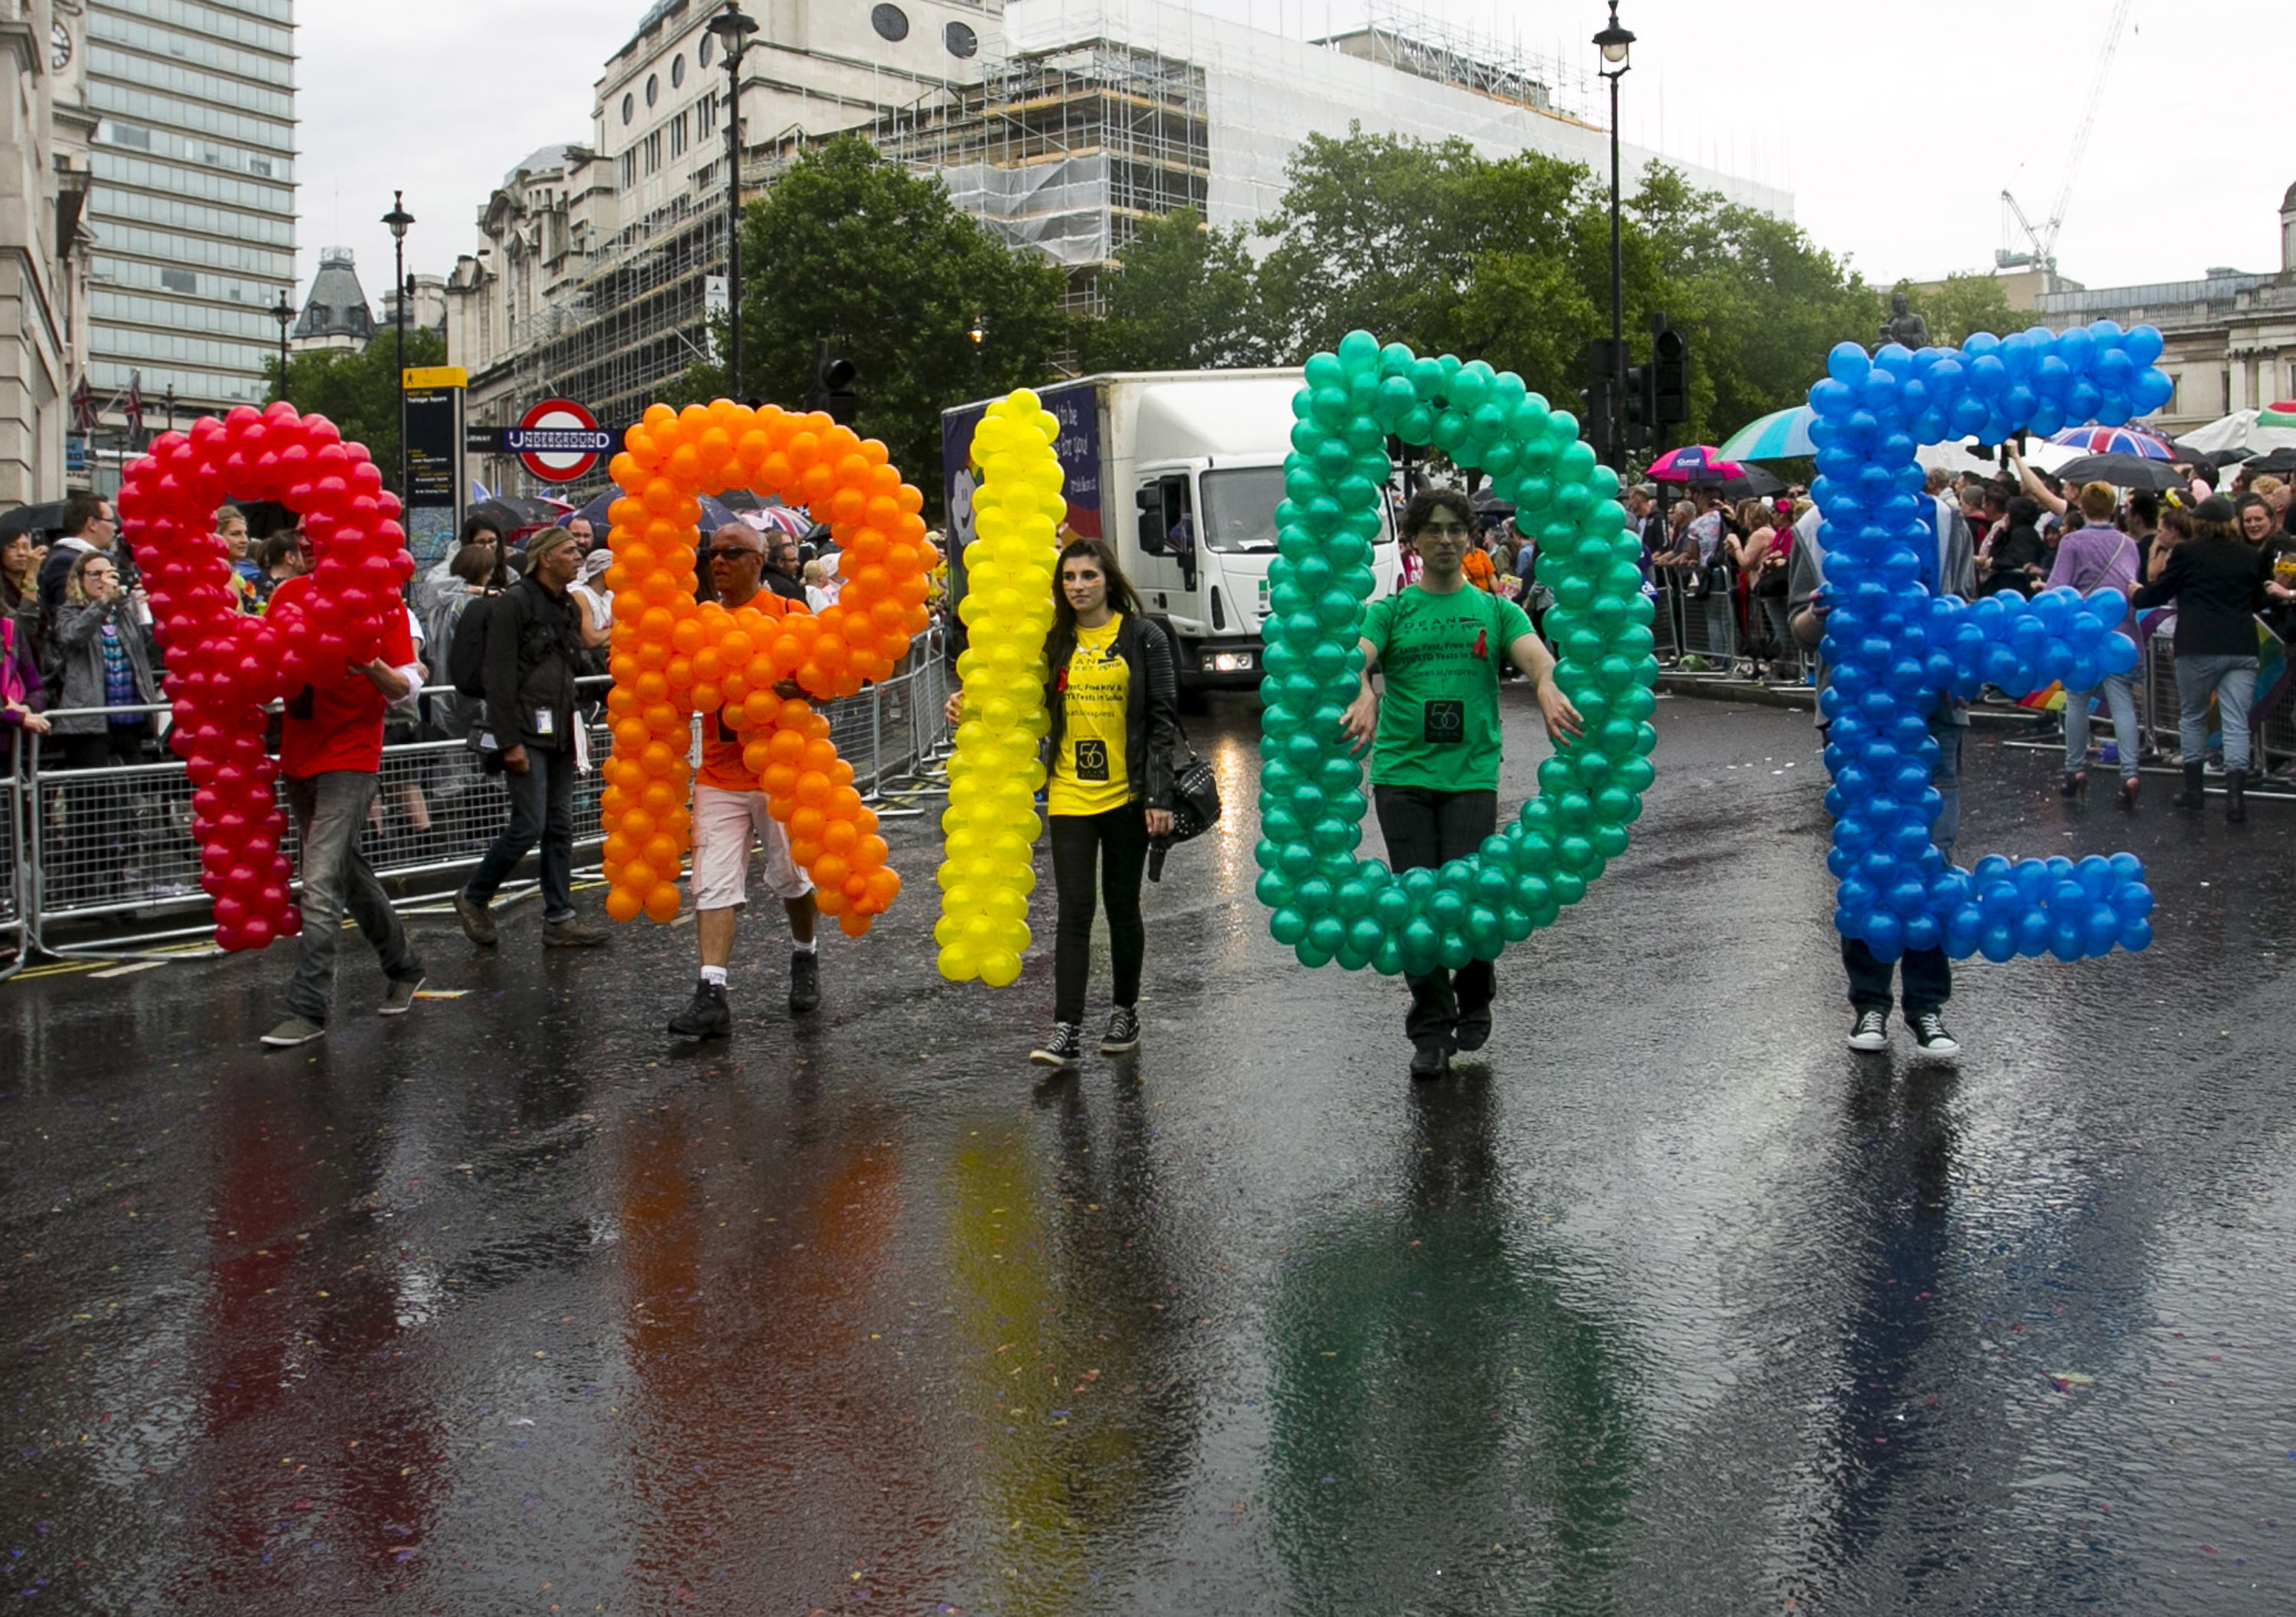 People take part in the Pride in London march in 2014, which celebrates those identifying as part of the LGBT acronym and their allies.